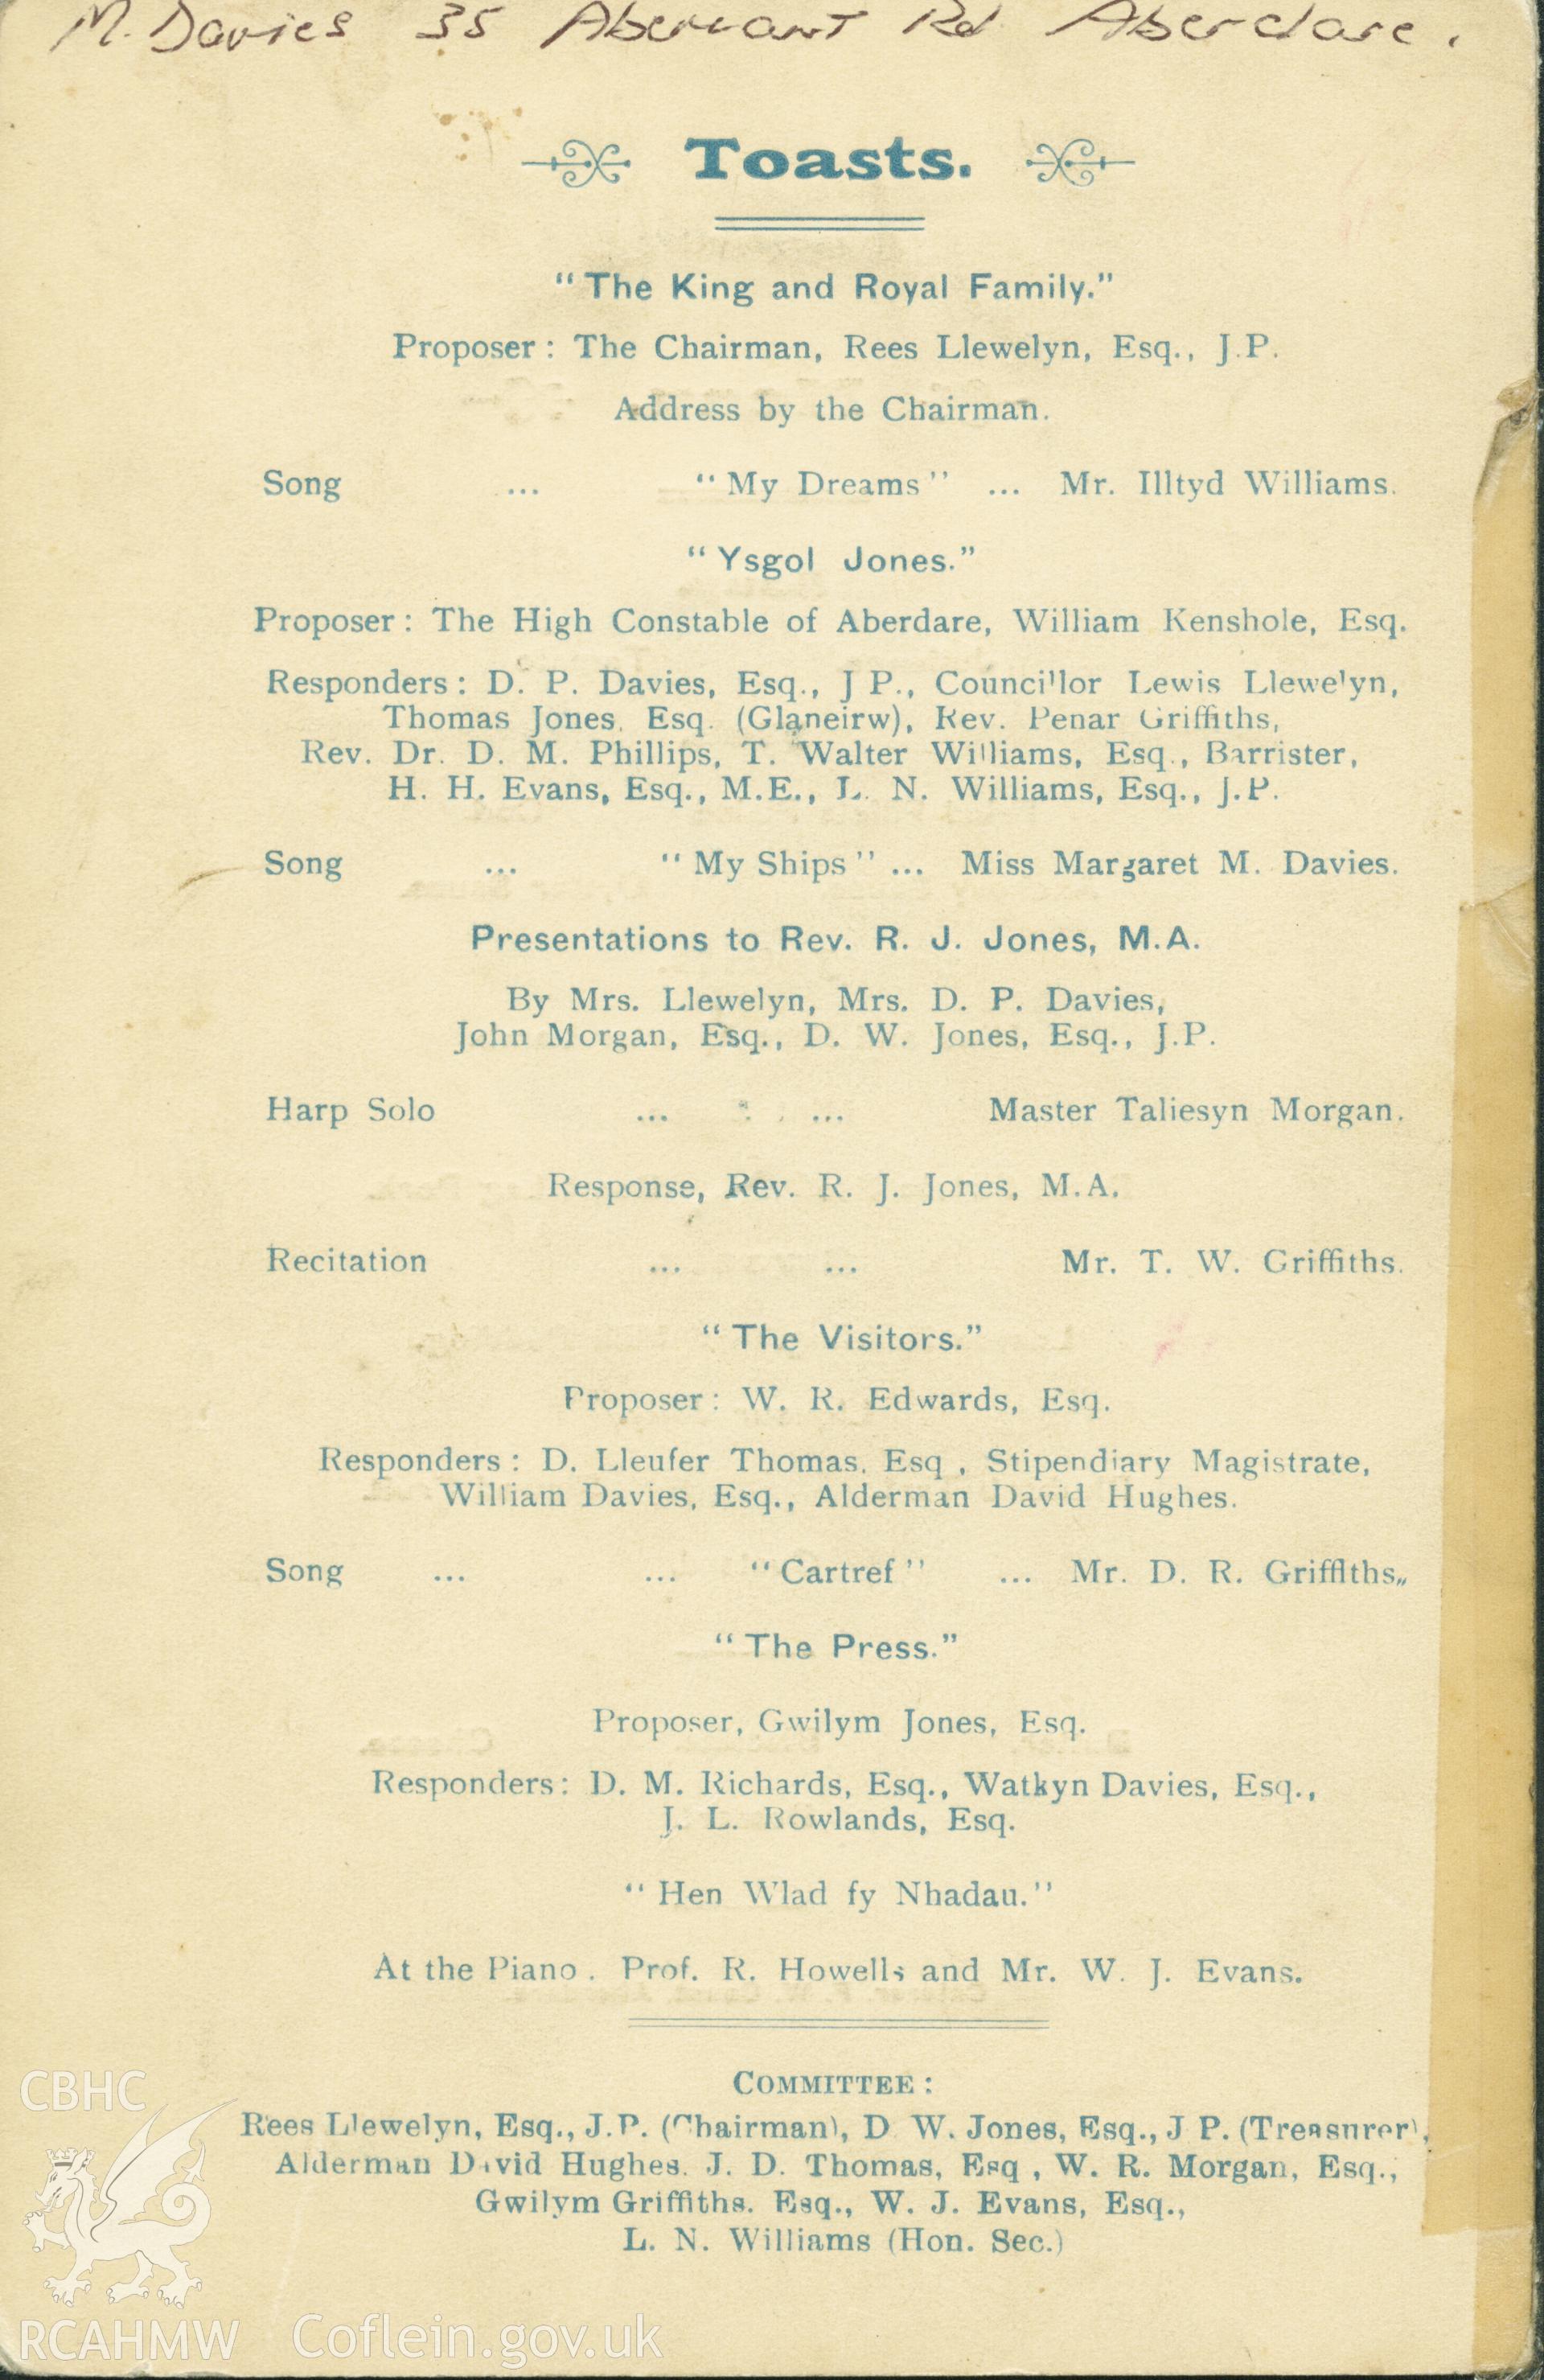 Copy of menu for the Ysgol Jones Re-Union Banquet & Presentation at Memorial Hall, Aberdare on Thursday 6th April 1911. Donated to the RCAHMW during the Digital Dissent Project.